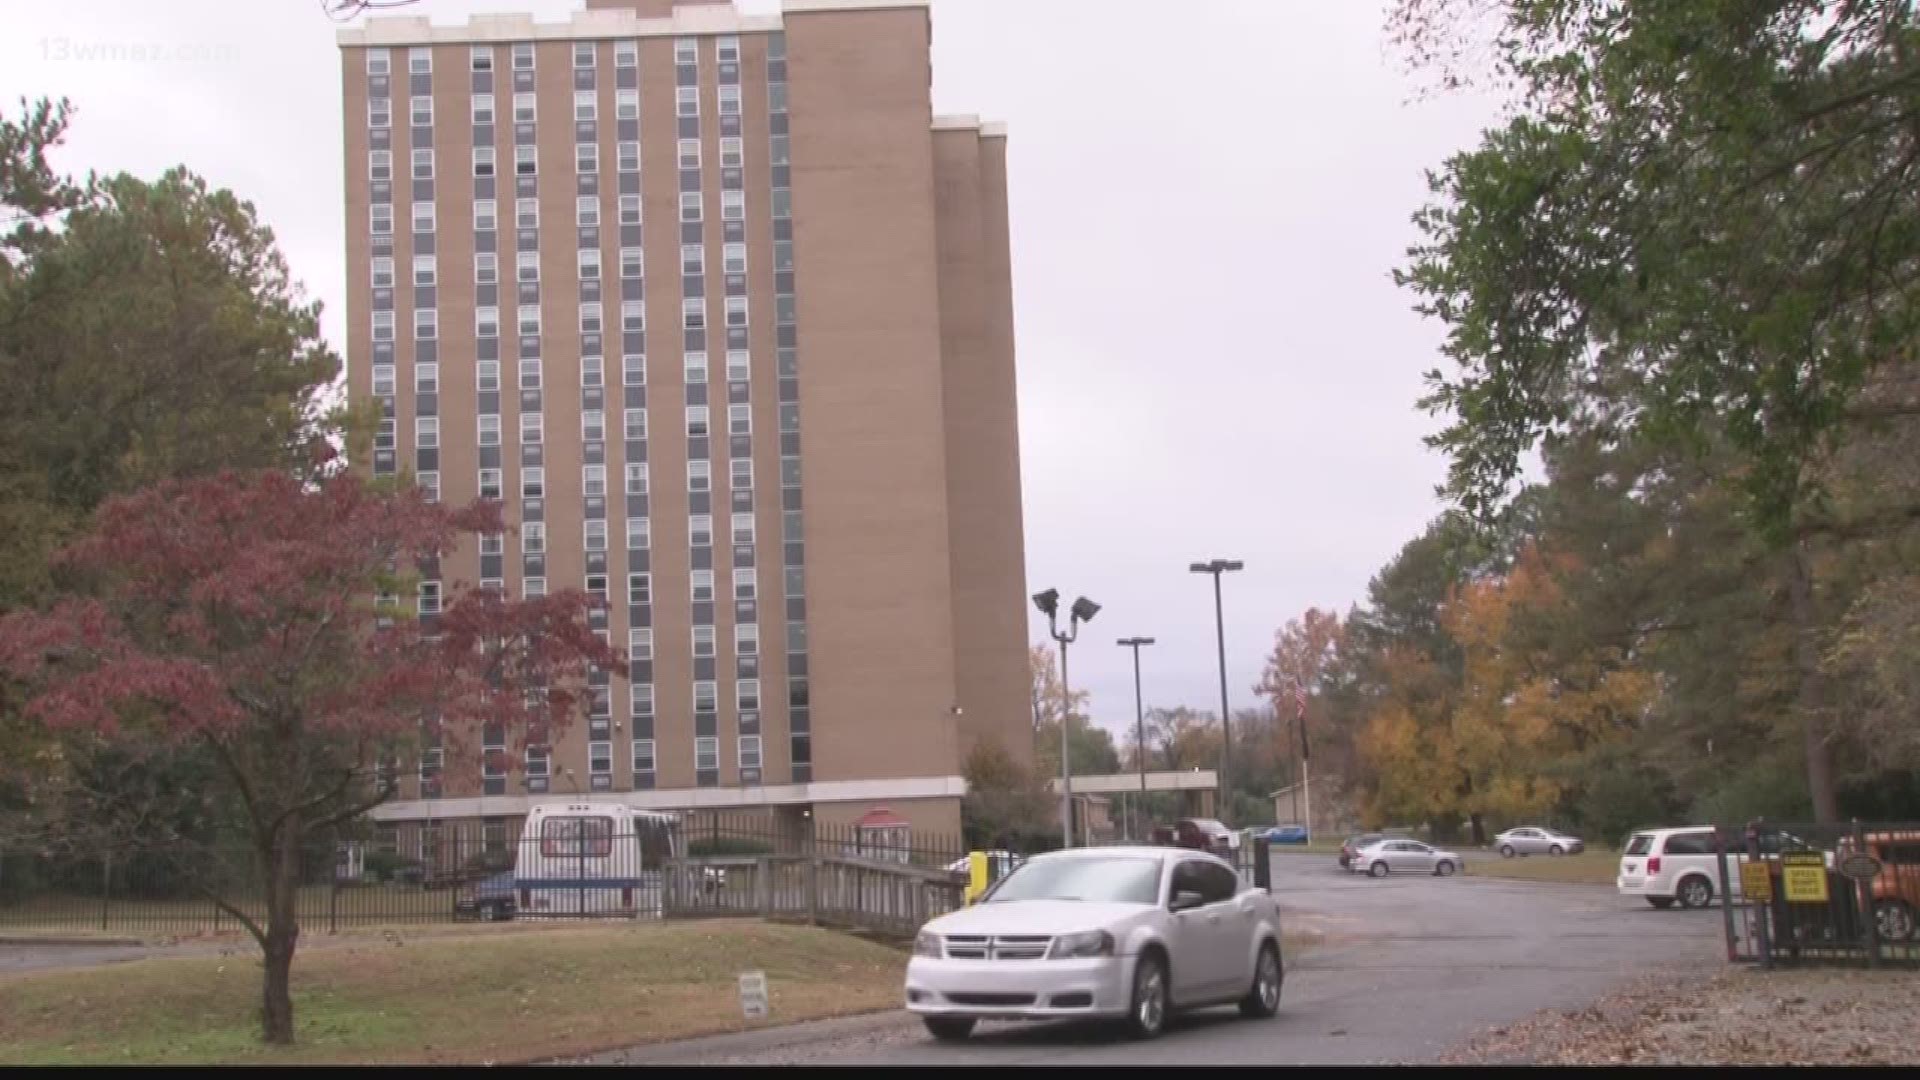 Some seniors at a low-income housing complex could see some relief after complaints to the county and management.